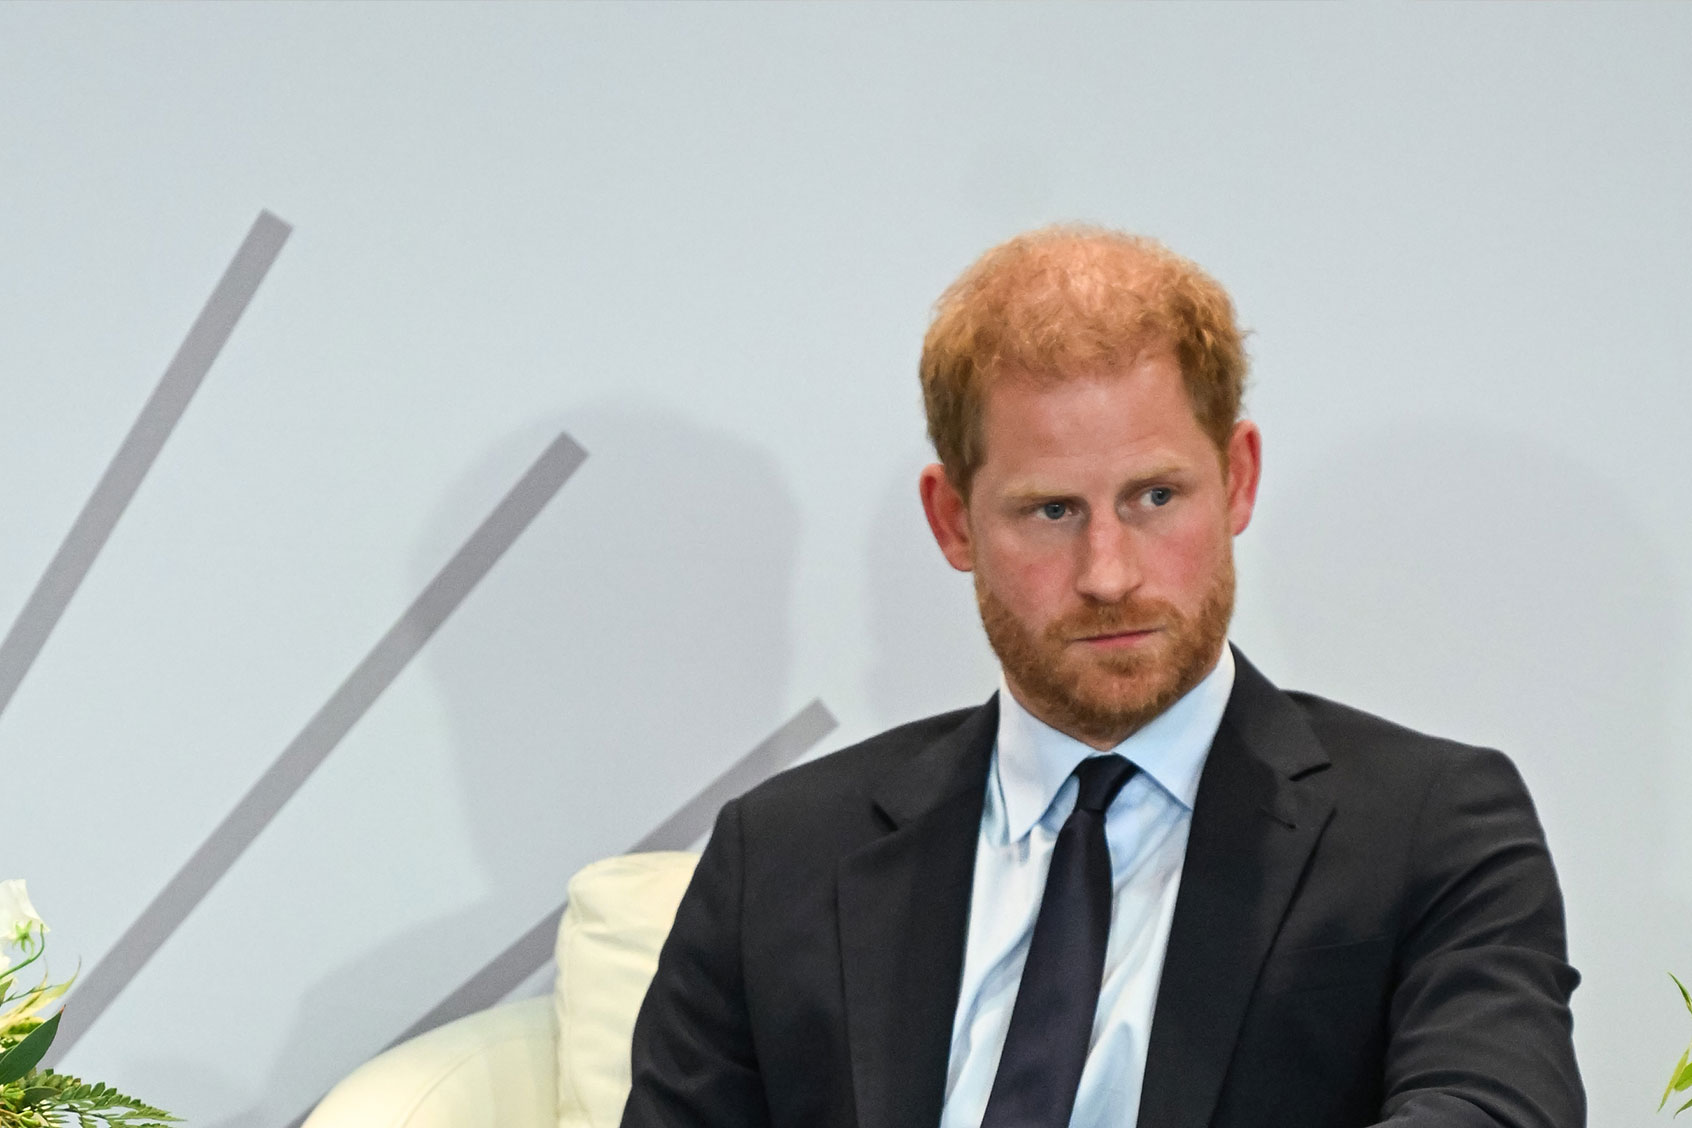 Prince Harry loses High Court challenge over UK security levels, says he will appeal decision